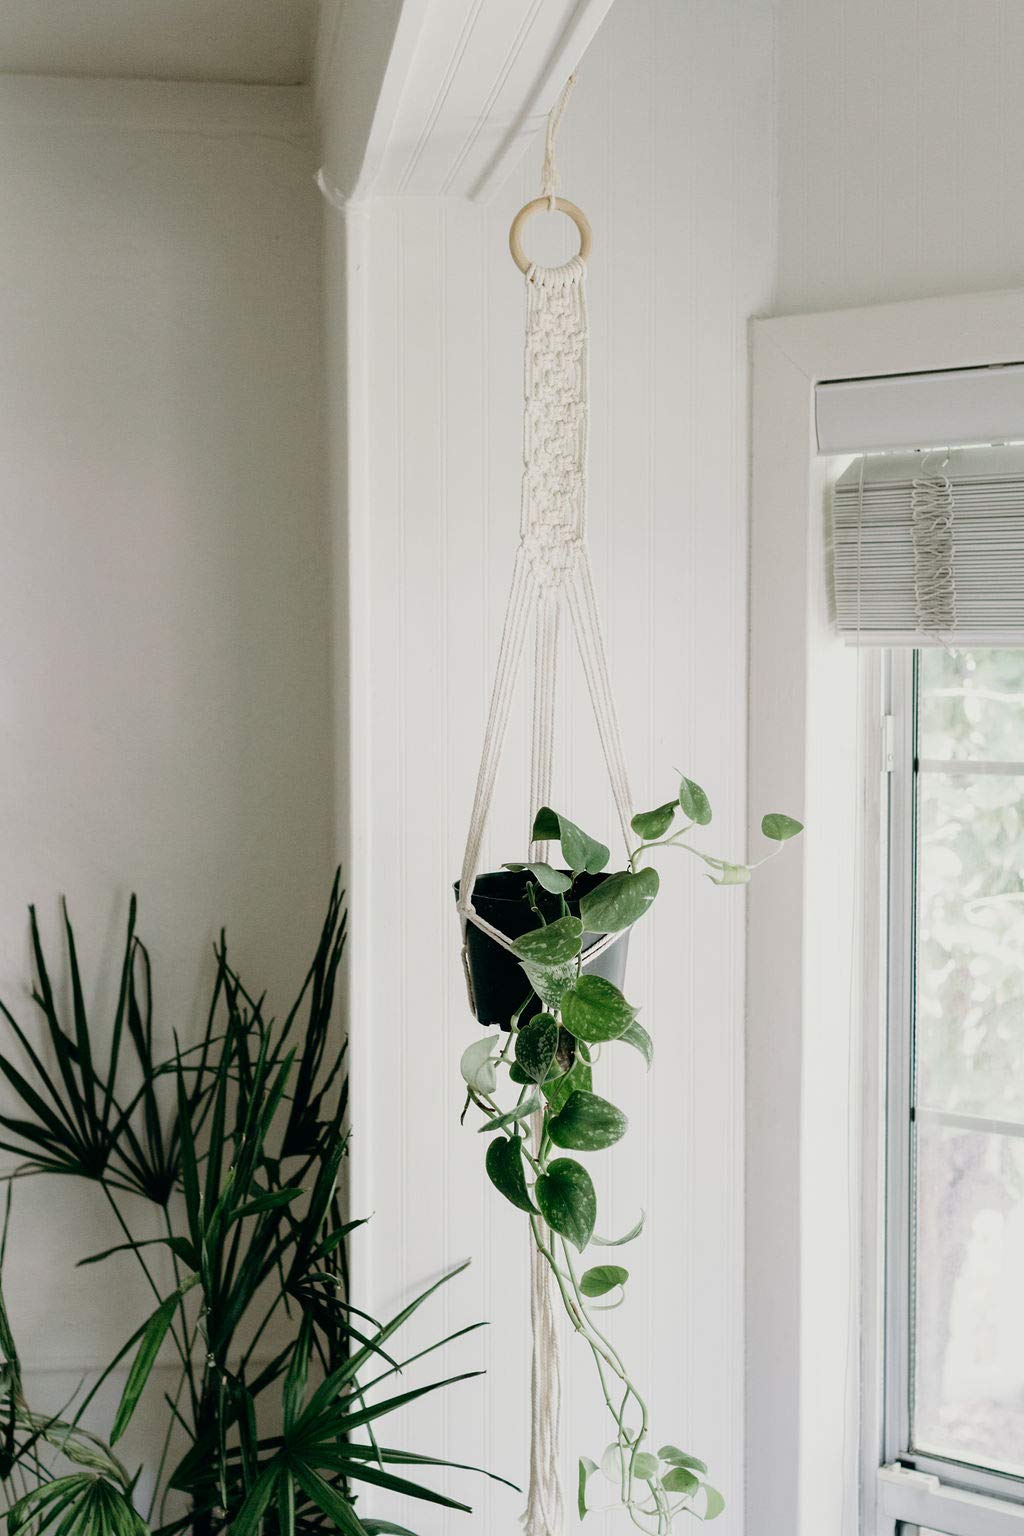 DIY Macrame Kit for Beginners by I HEART KITS – Makes 3 Projects: 1 Macrame  Plant Hanger, 1 Macrame Keychain & 1 Macrame Wall Hanging, Includes Cotton